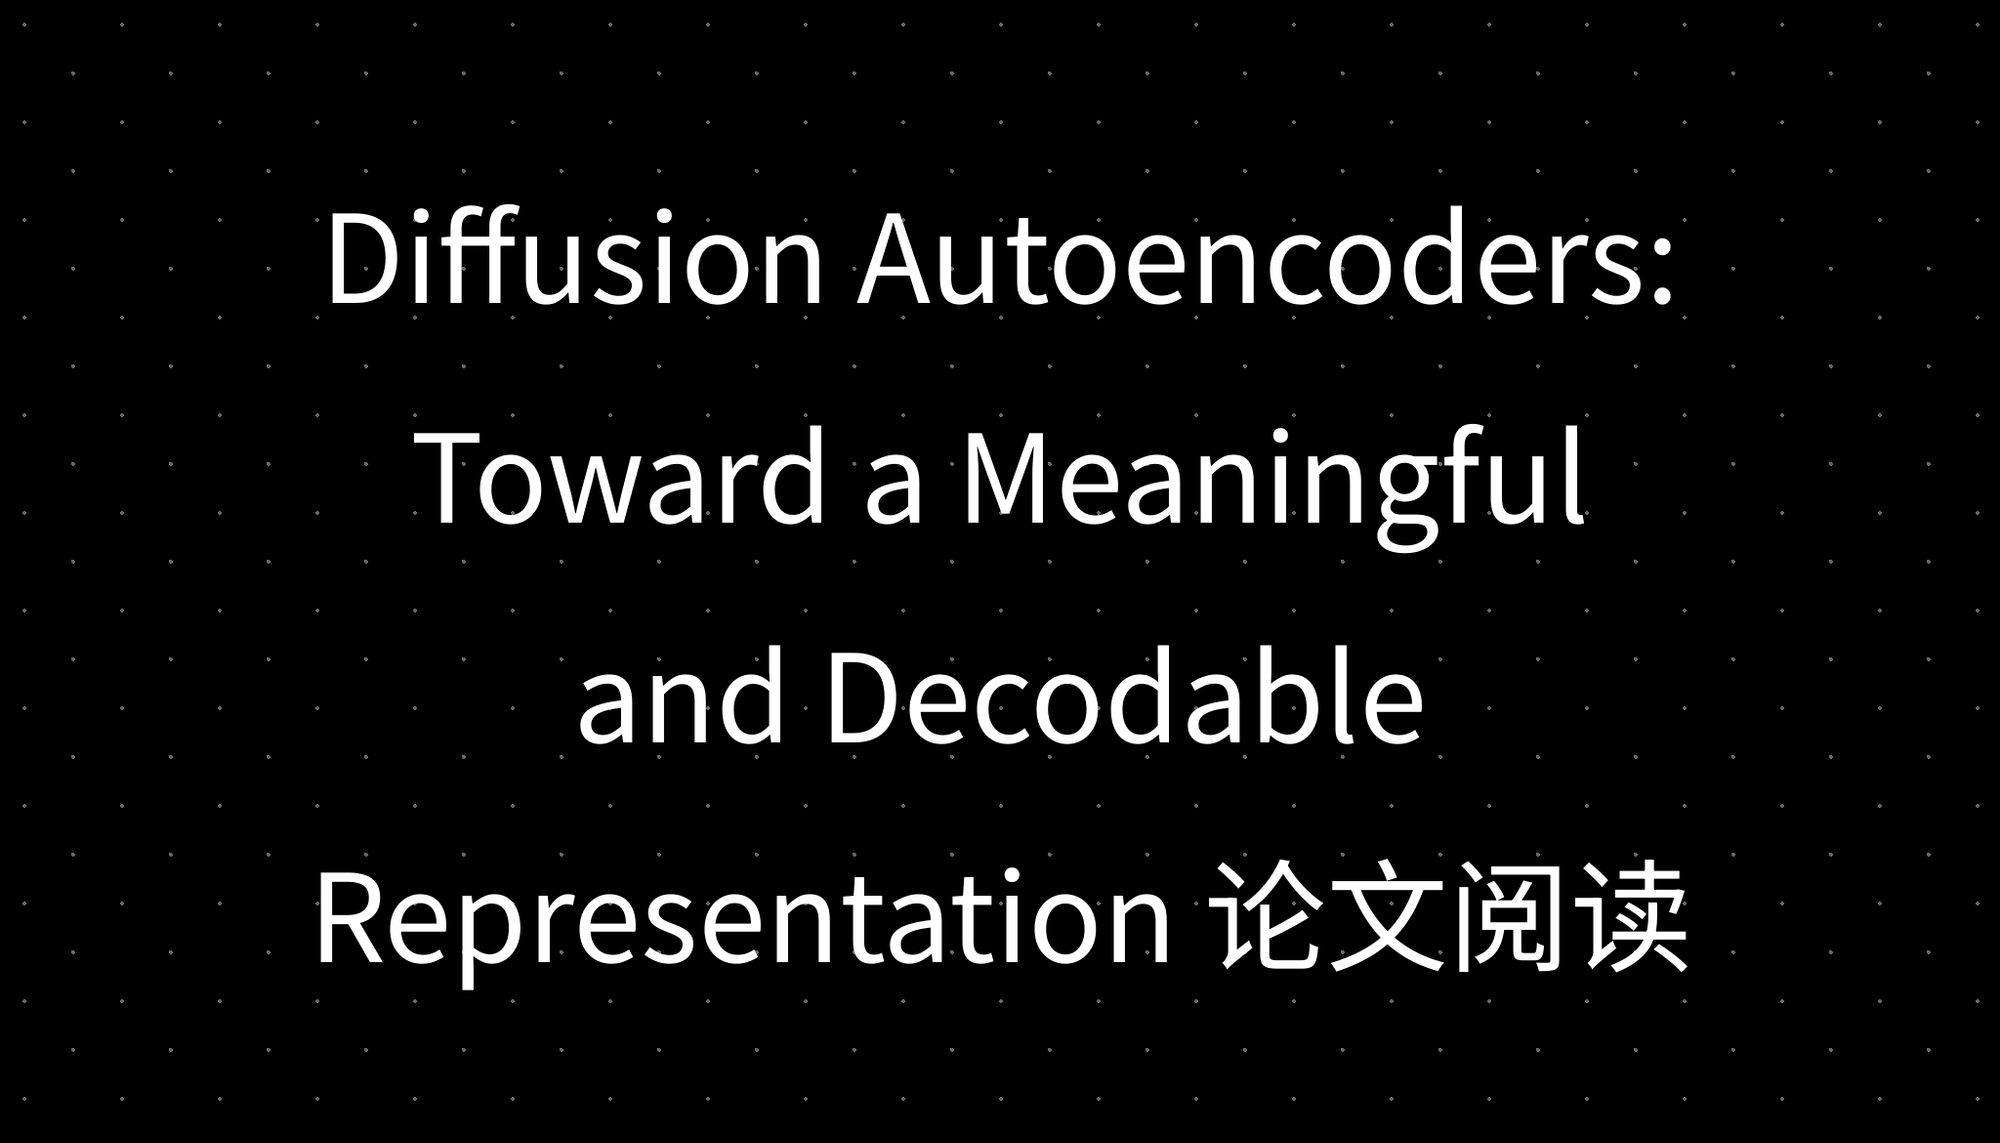 Diffusion Autoencoders: Toward a Meaningful and Decodable Representation 论文阅读